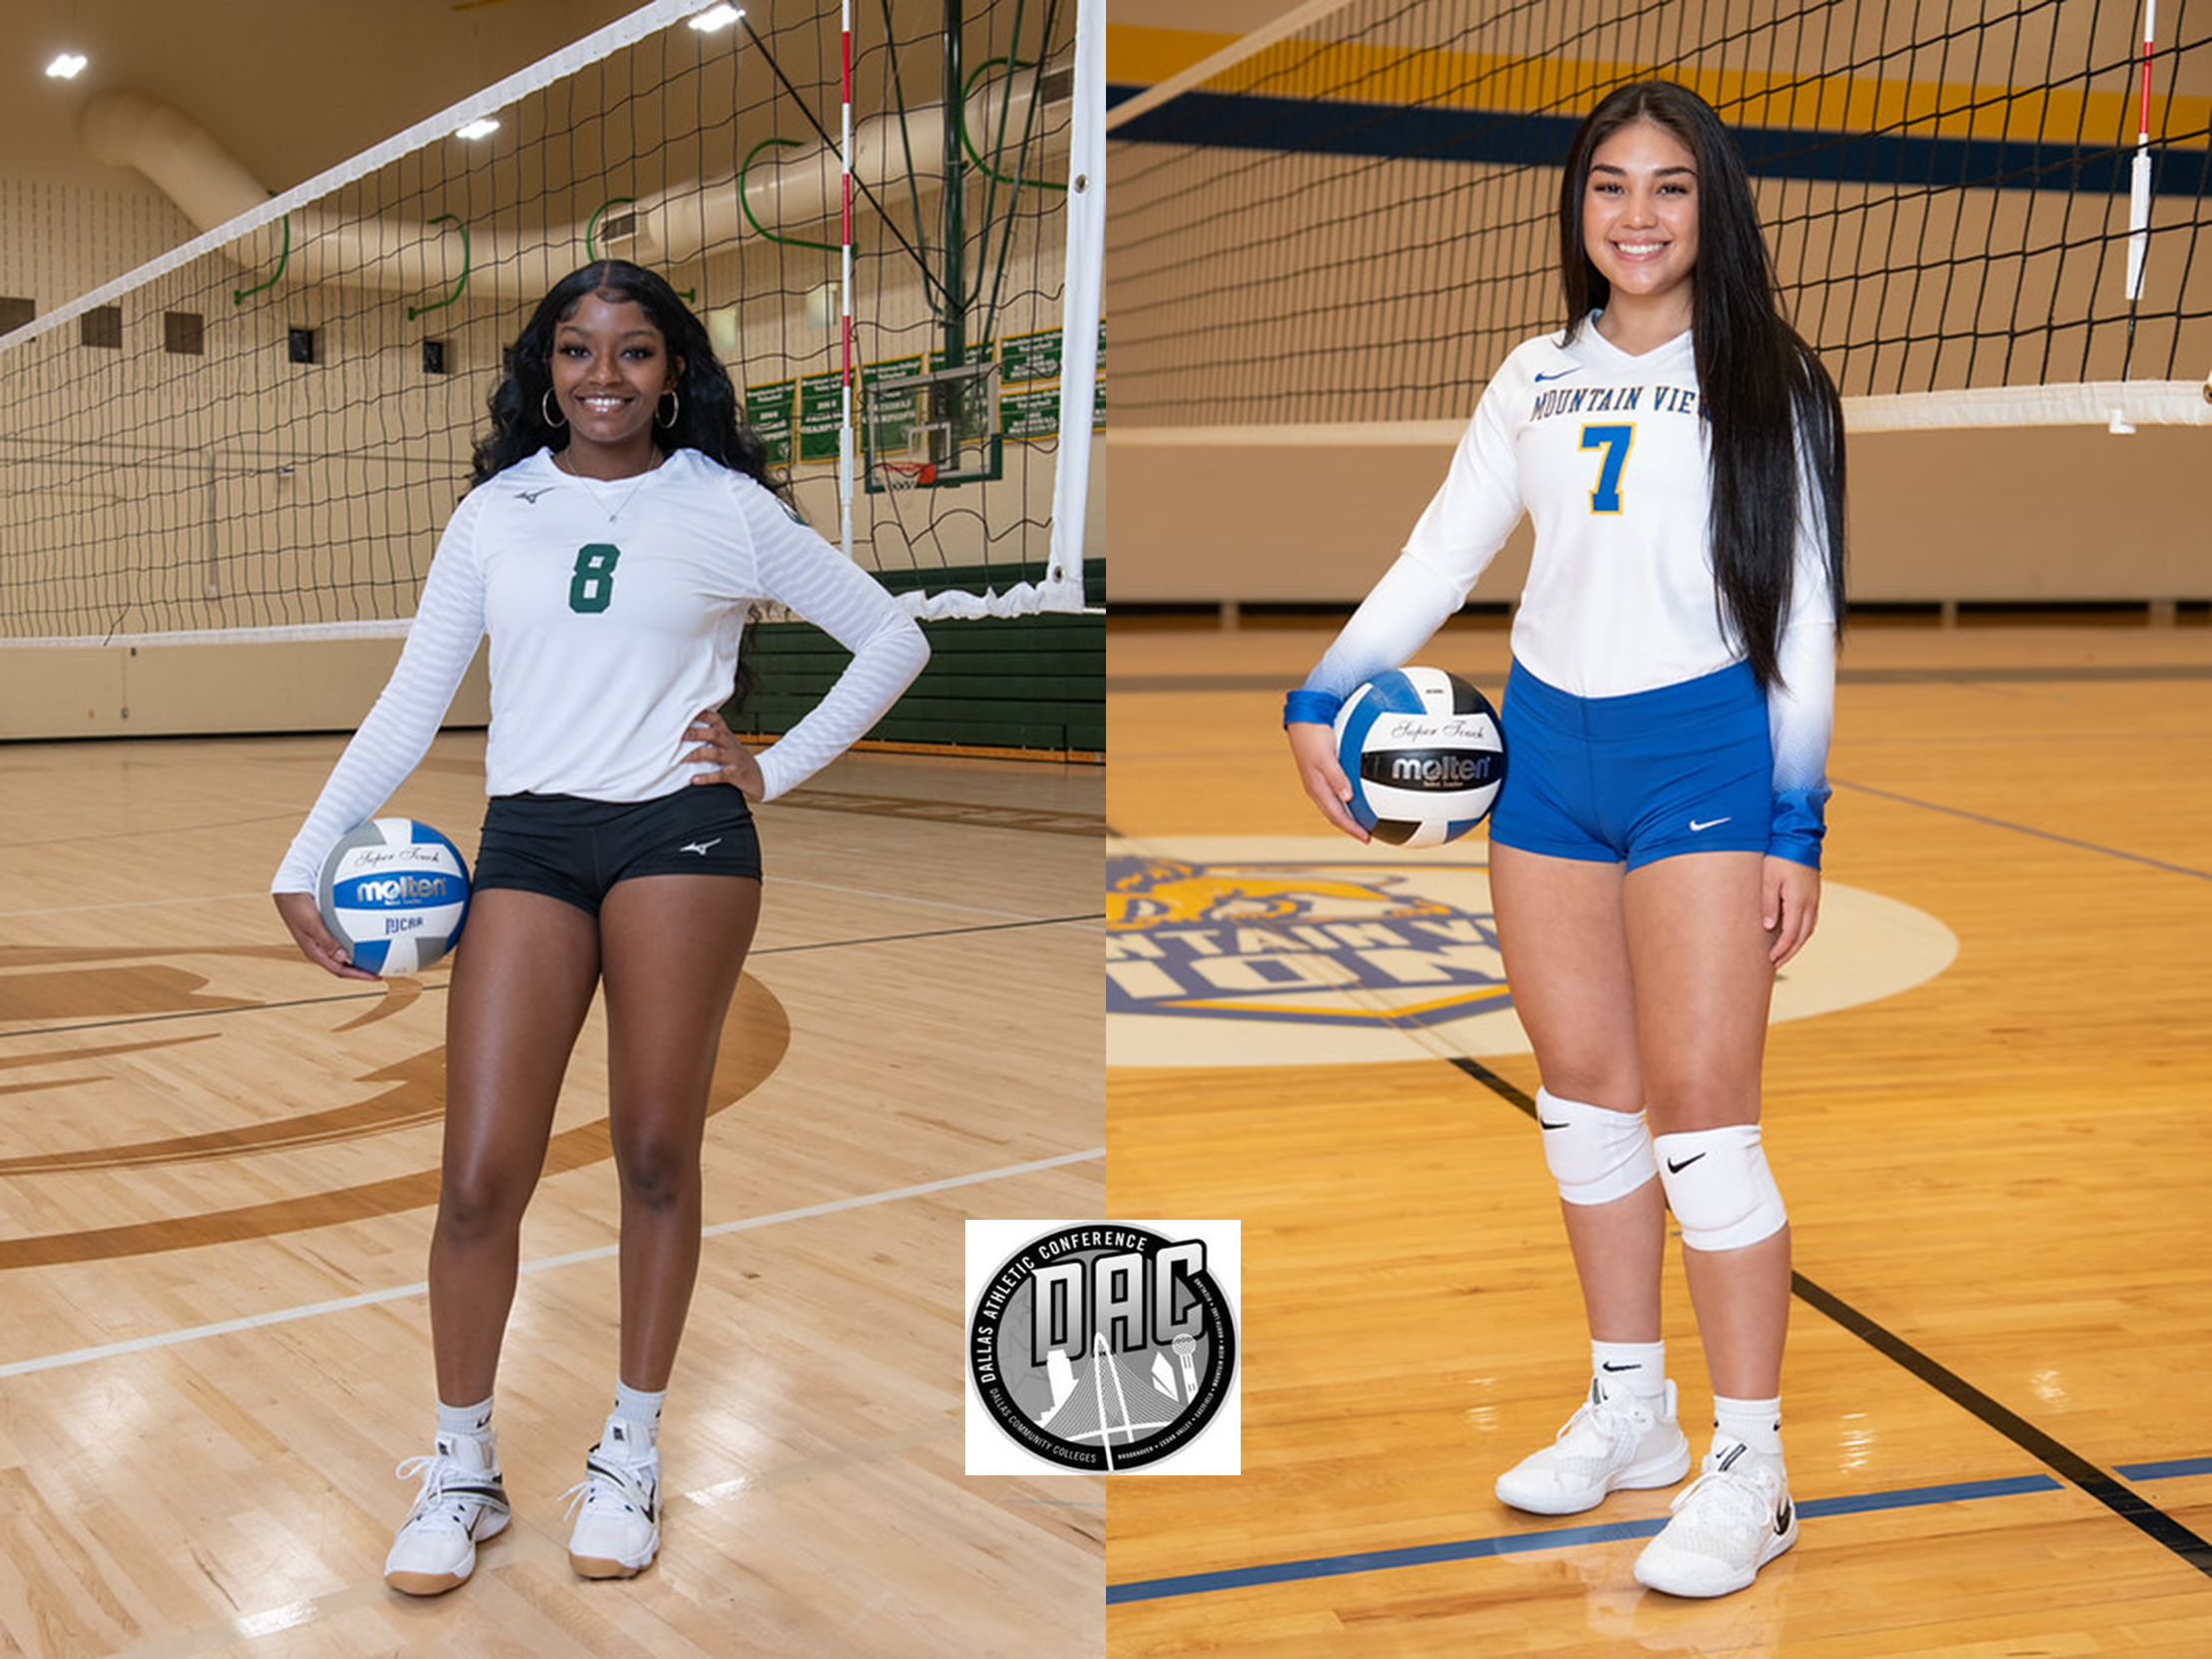 Dallas College Mountain View's Marissa Narvaiz and Dallas College Brookhaven's Ariel Austin were named the Dallas Athletic Conference volleyball Players of the Week. Narvaiz won the league's defensive award.